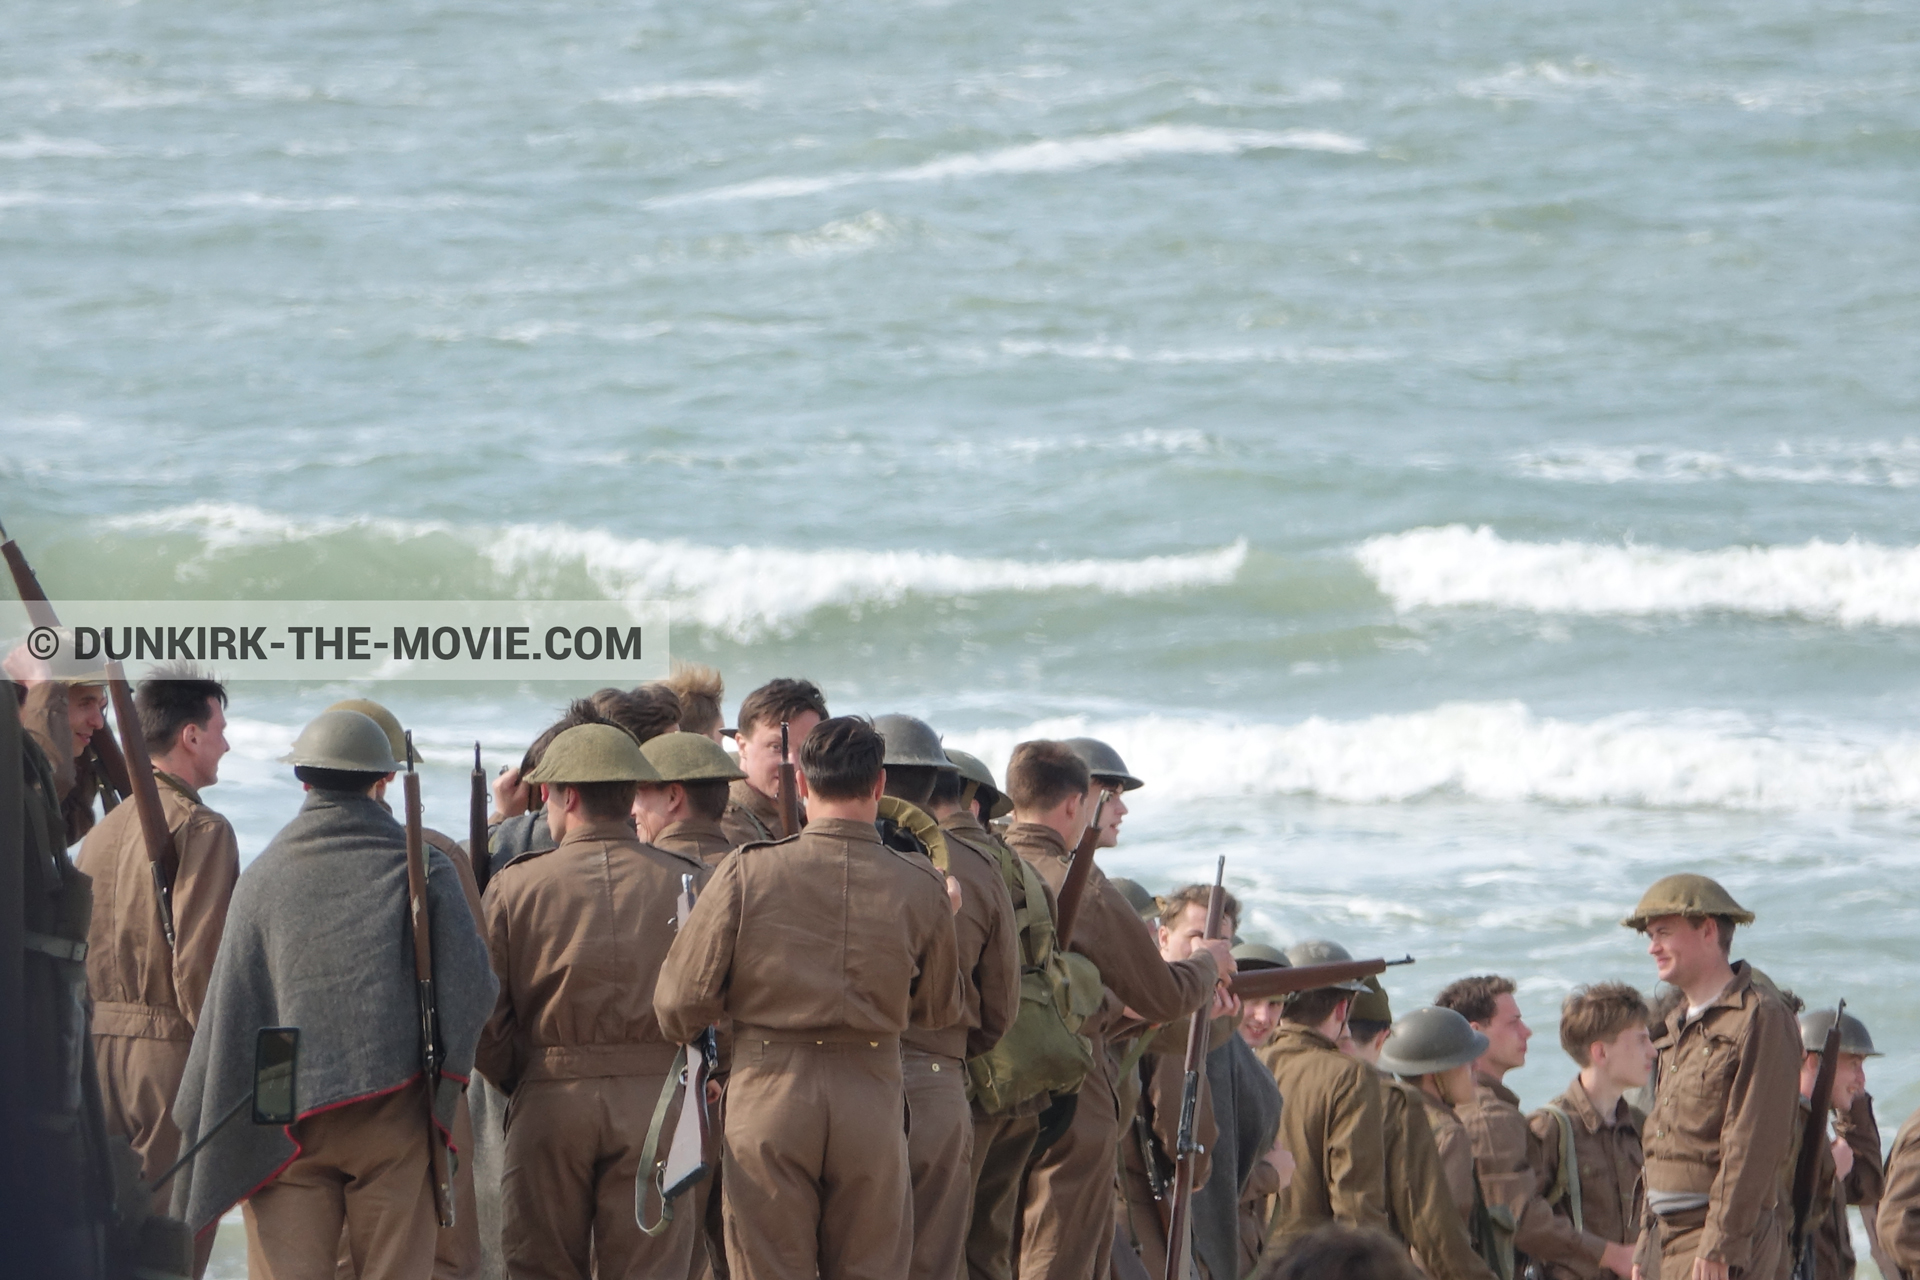 Picture with supernumeraries, beach,  from behind the scene of the Dunkirk movie by Nolan